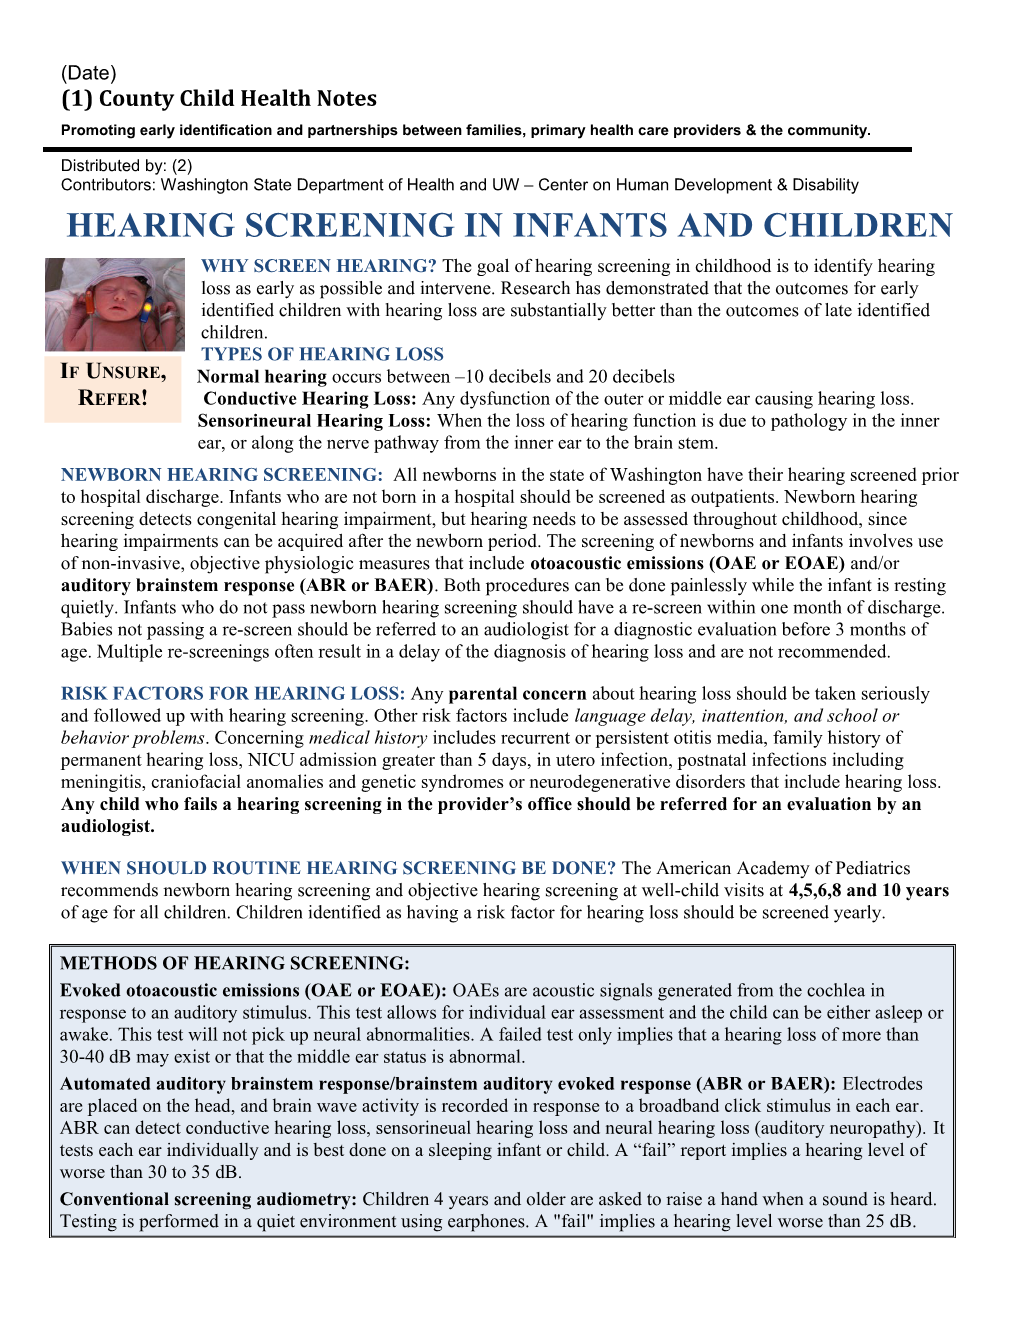 Developmental Surveillance and Screening in Primary Care